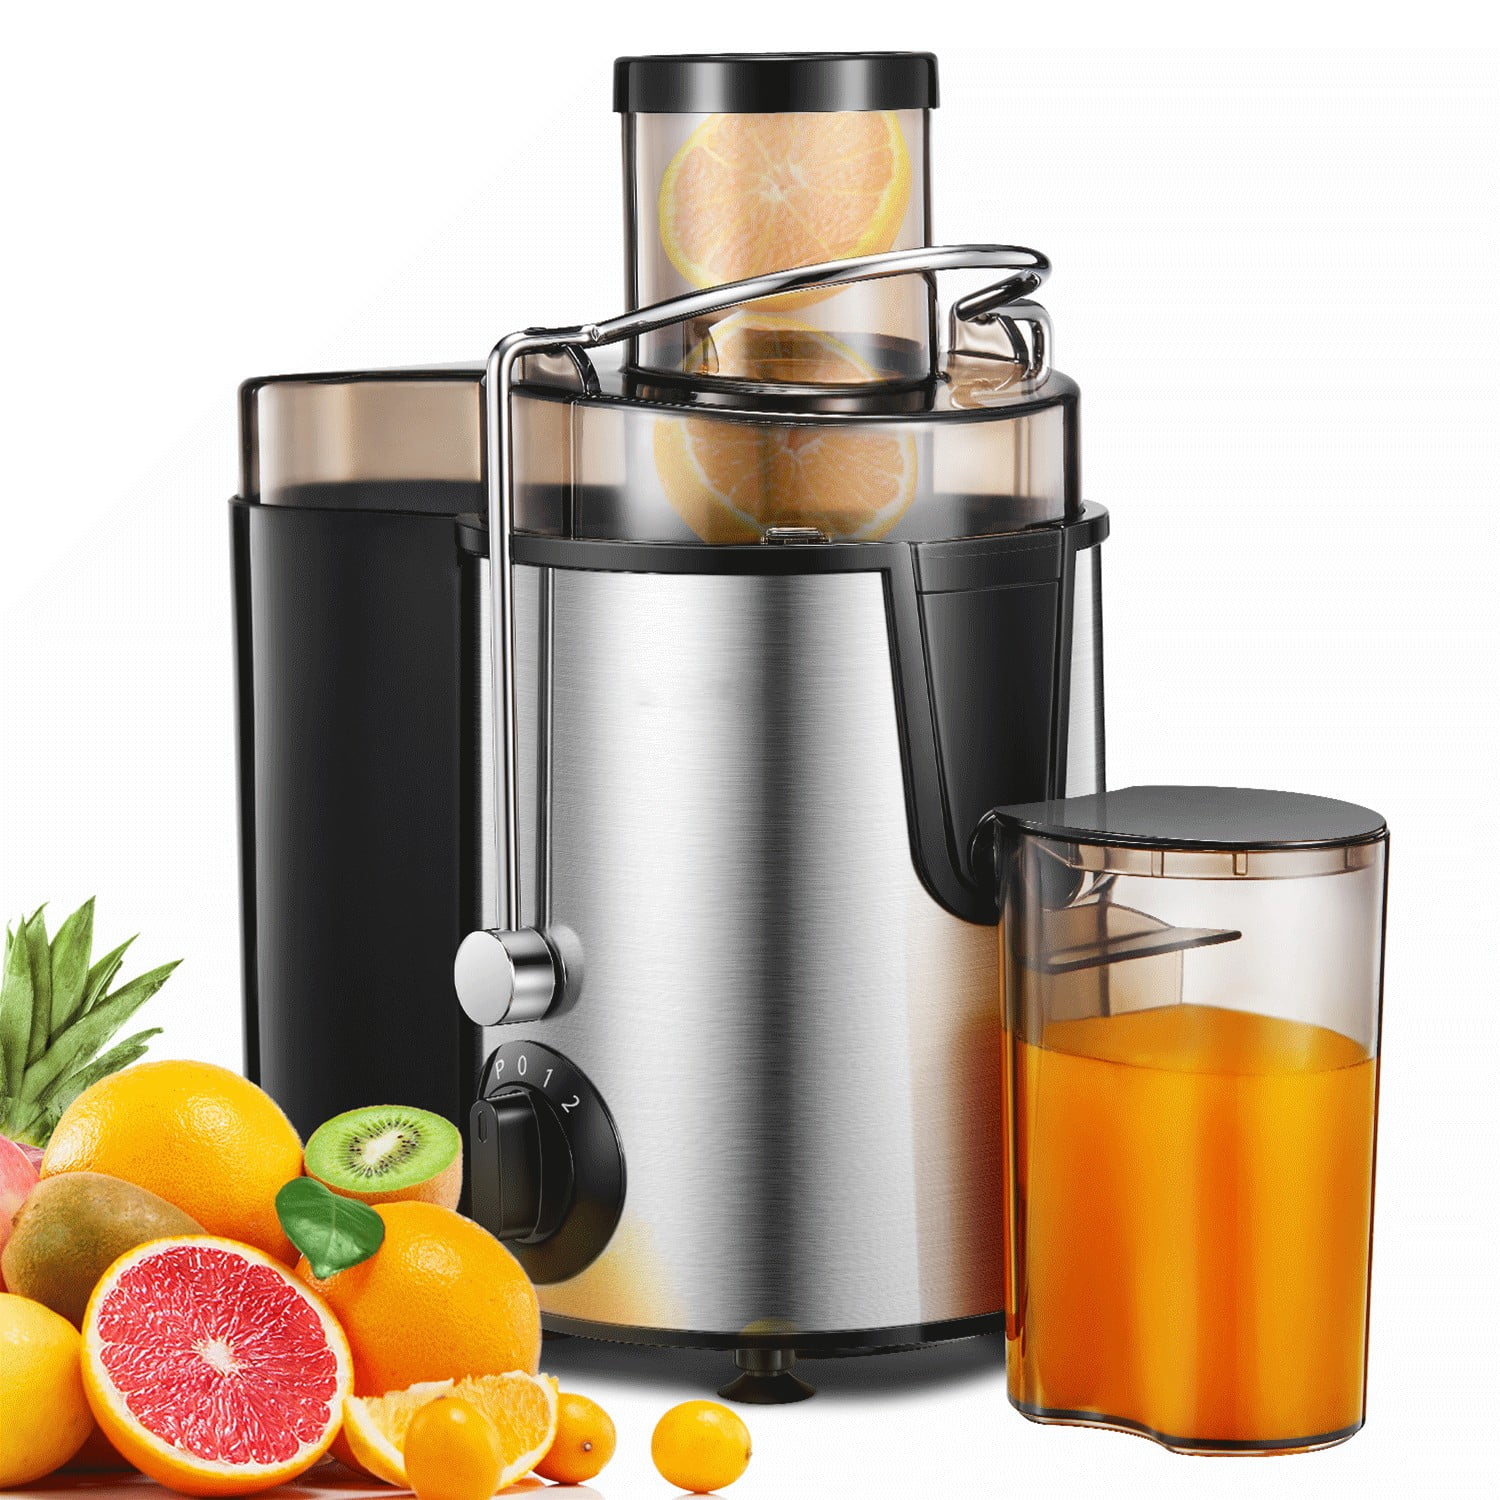 Juicer Centrifugal Juicer Machine Wide 3” Feed Chute Juice Extractor Easy  to Clean, Fruit Juicer with Pulse Function and Multi-Speed Control